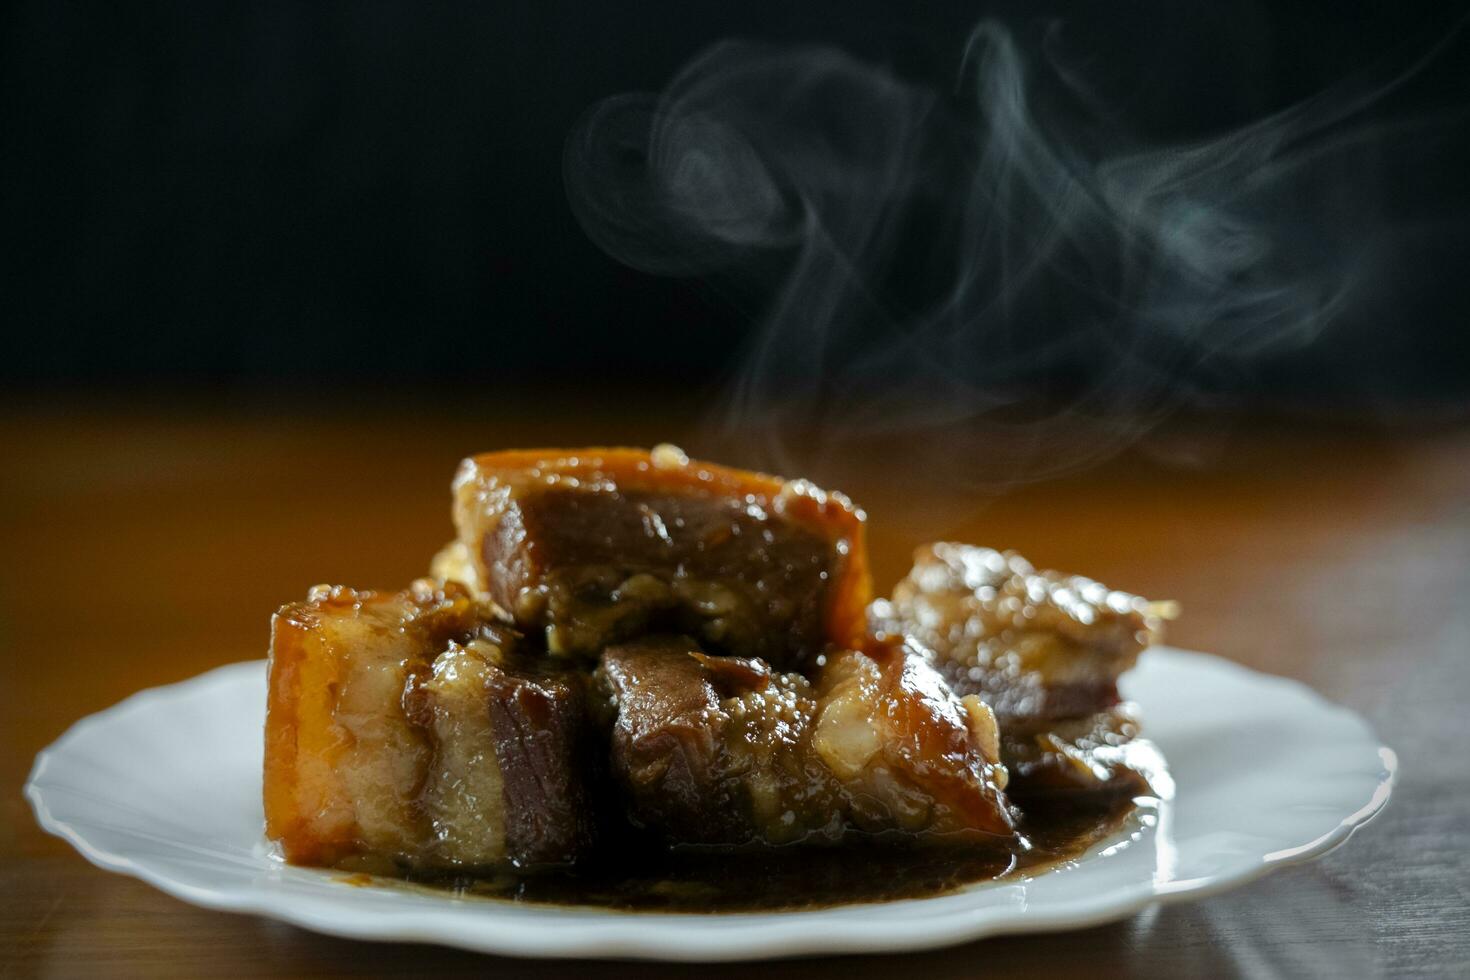 braised pork belly in sweet black soy sauce, Chinese food. photo